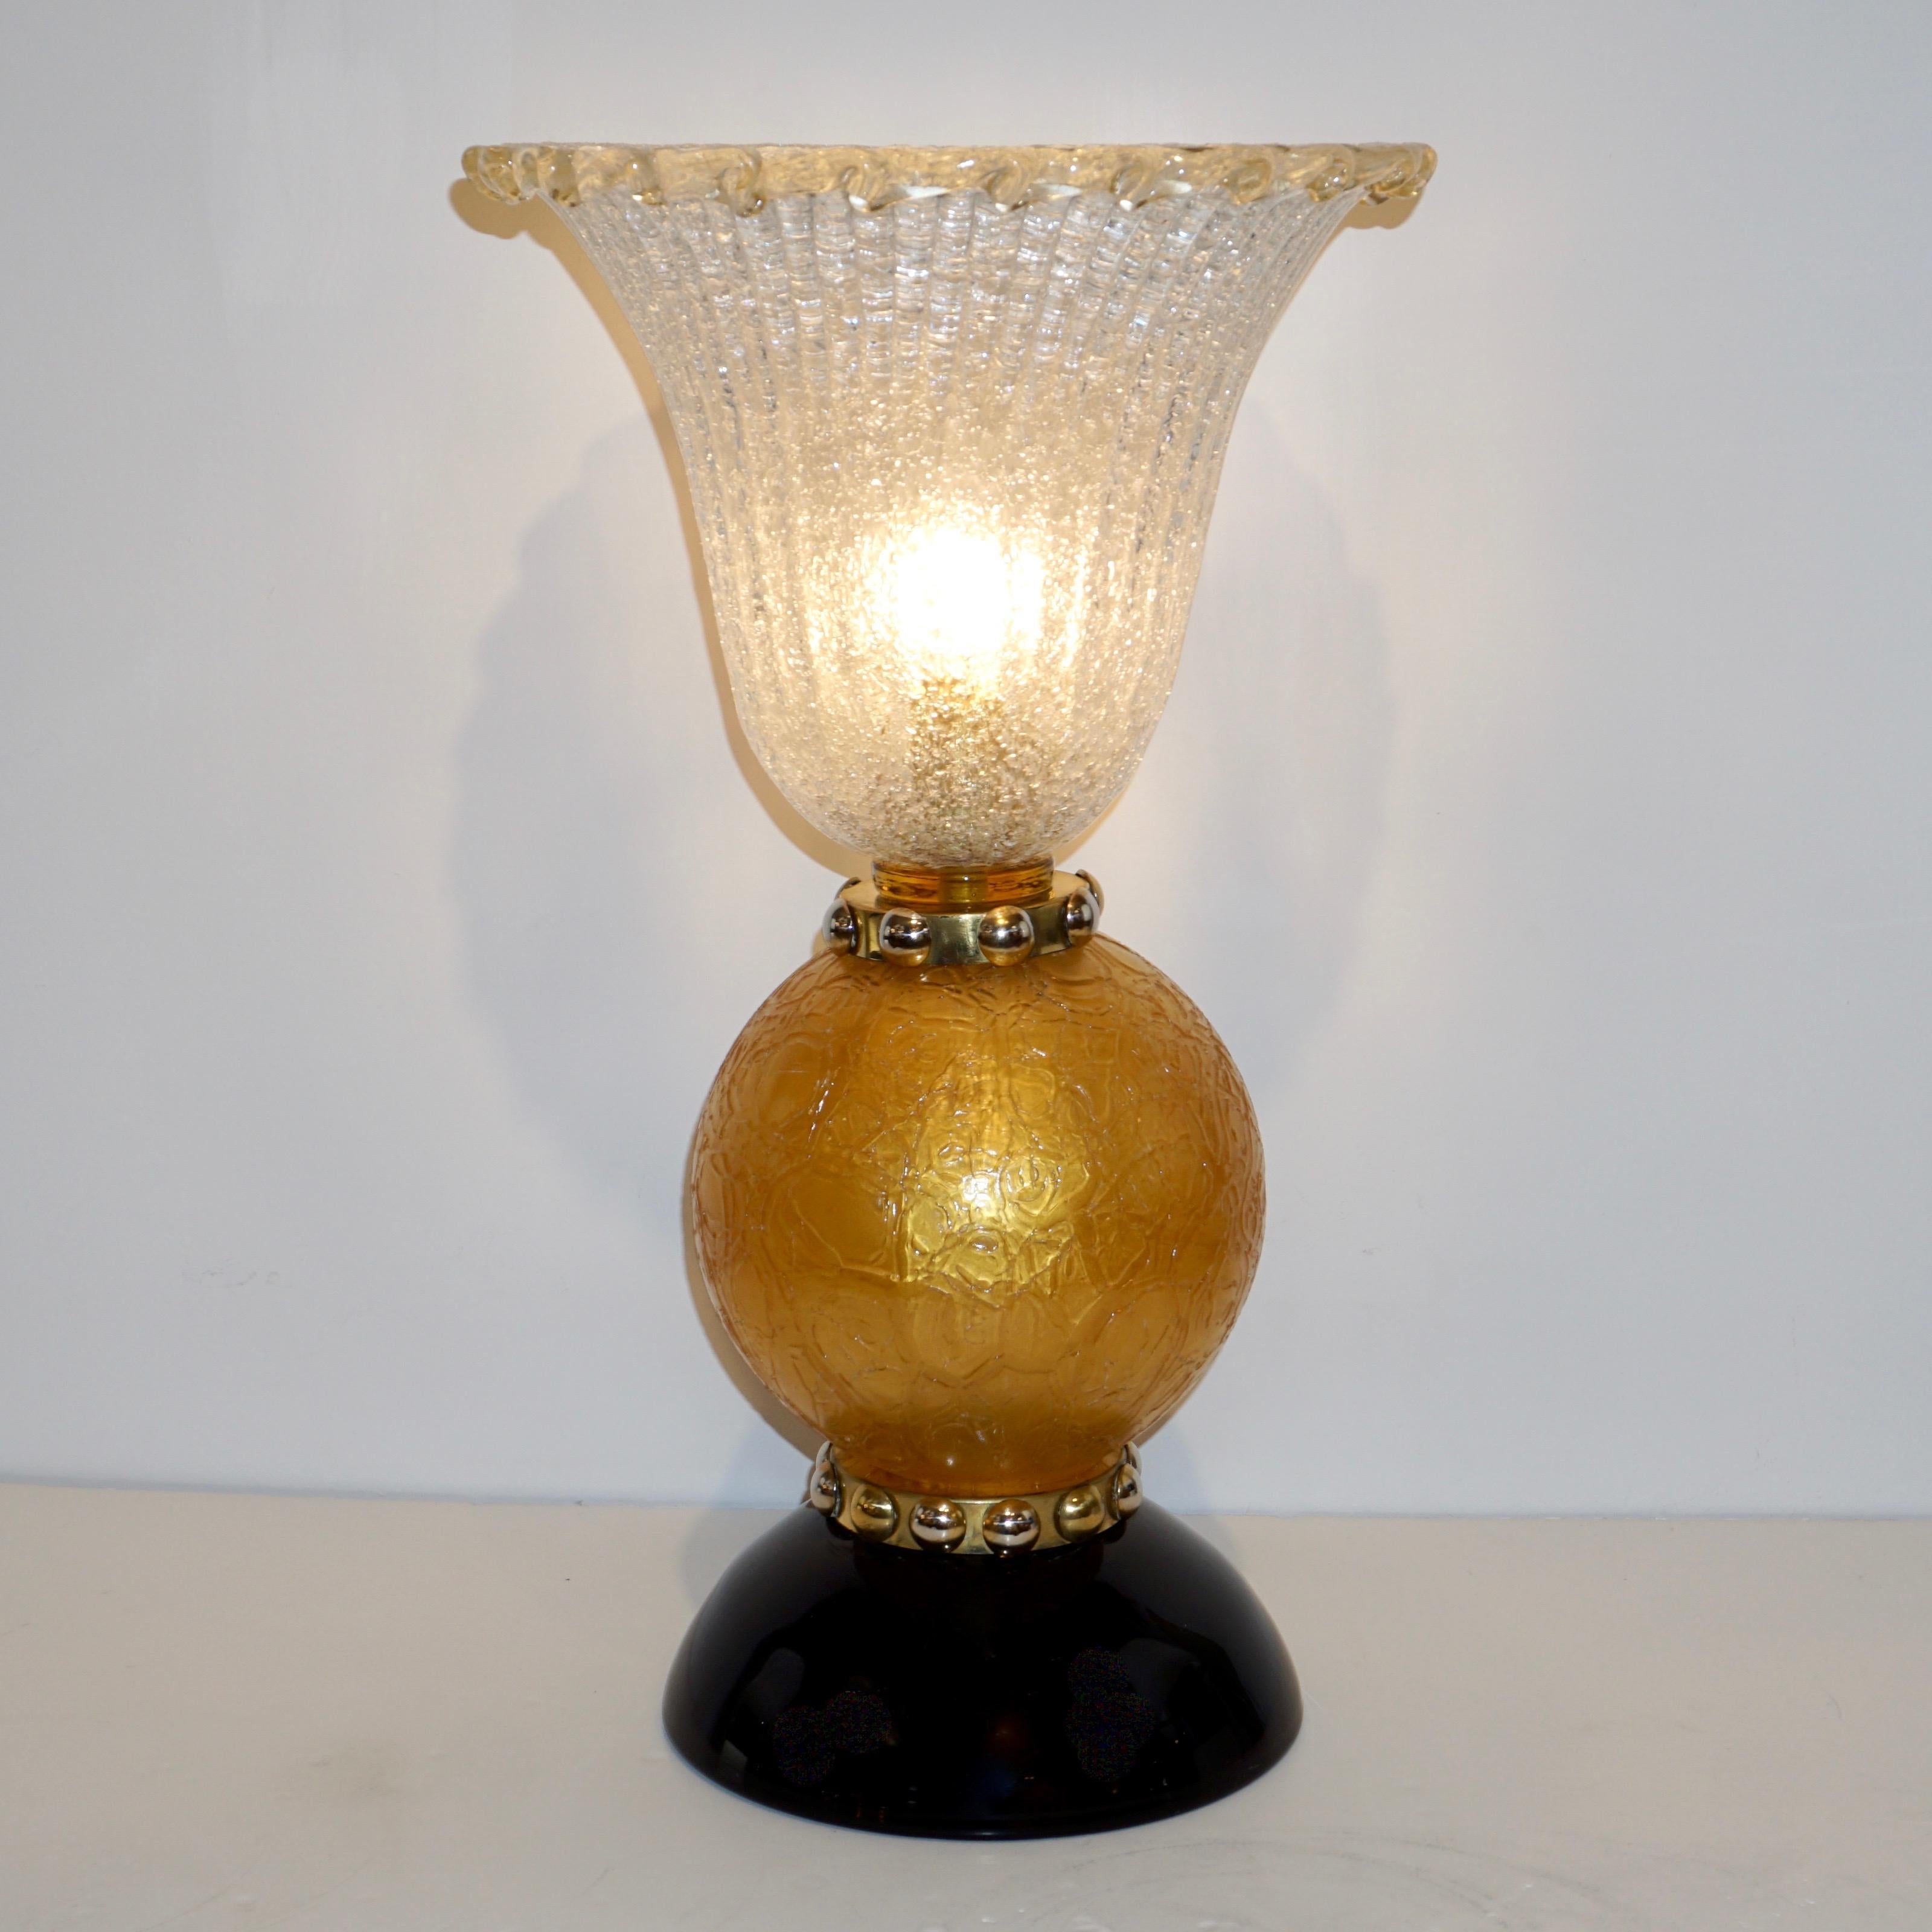 Italian Art Deco Style Gold Black Lamps with Barovier Crystal Murano Glass Shade 2